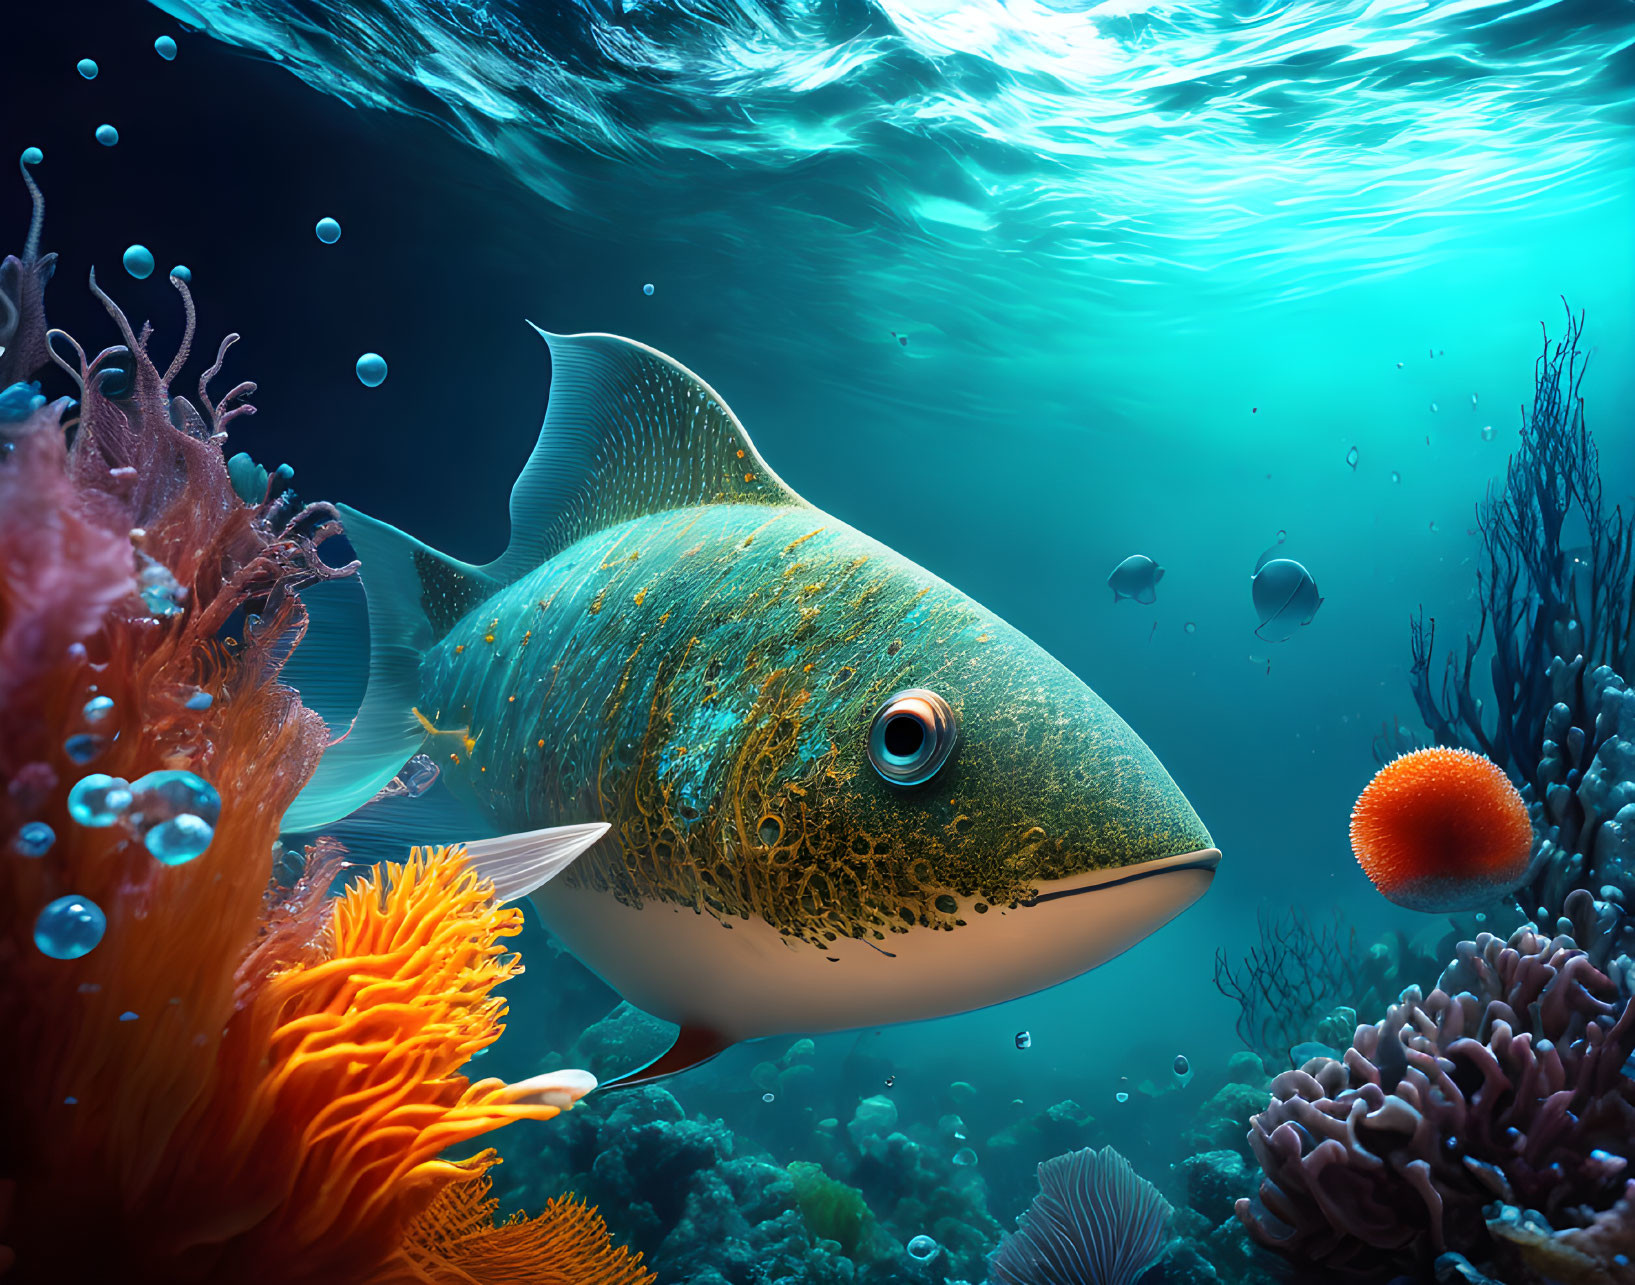 Colorful underwater scene with large fish, coral reefs, bubbles, and smaller fish in ocean setting